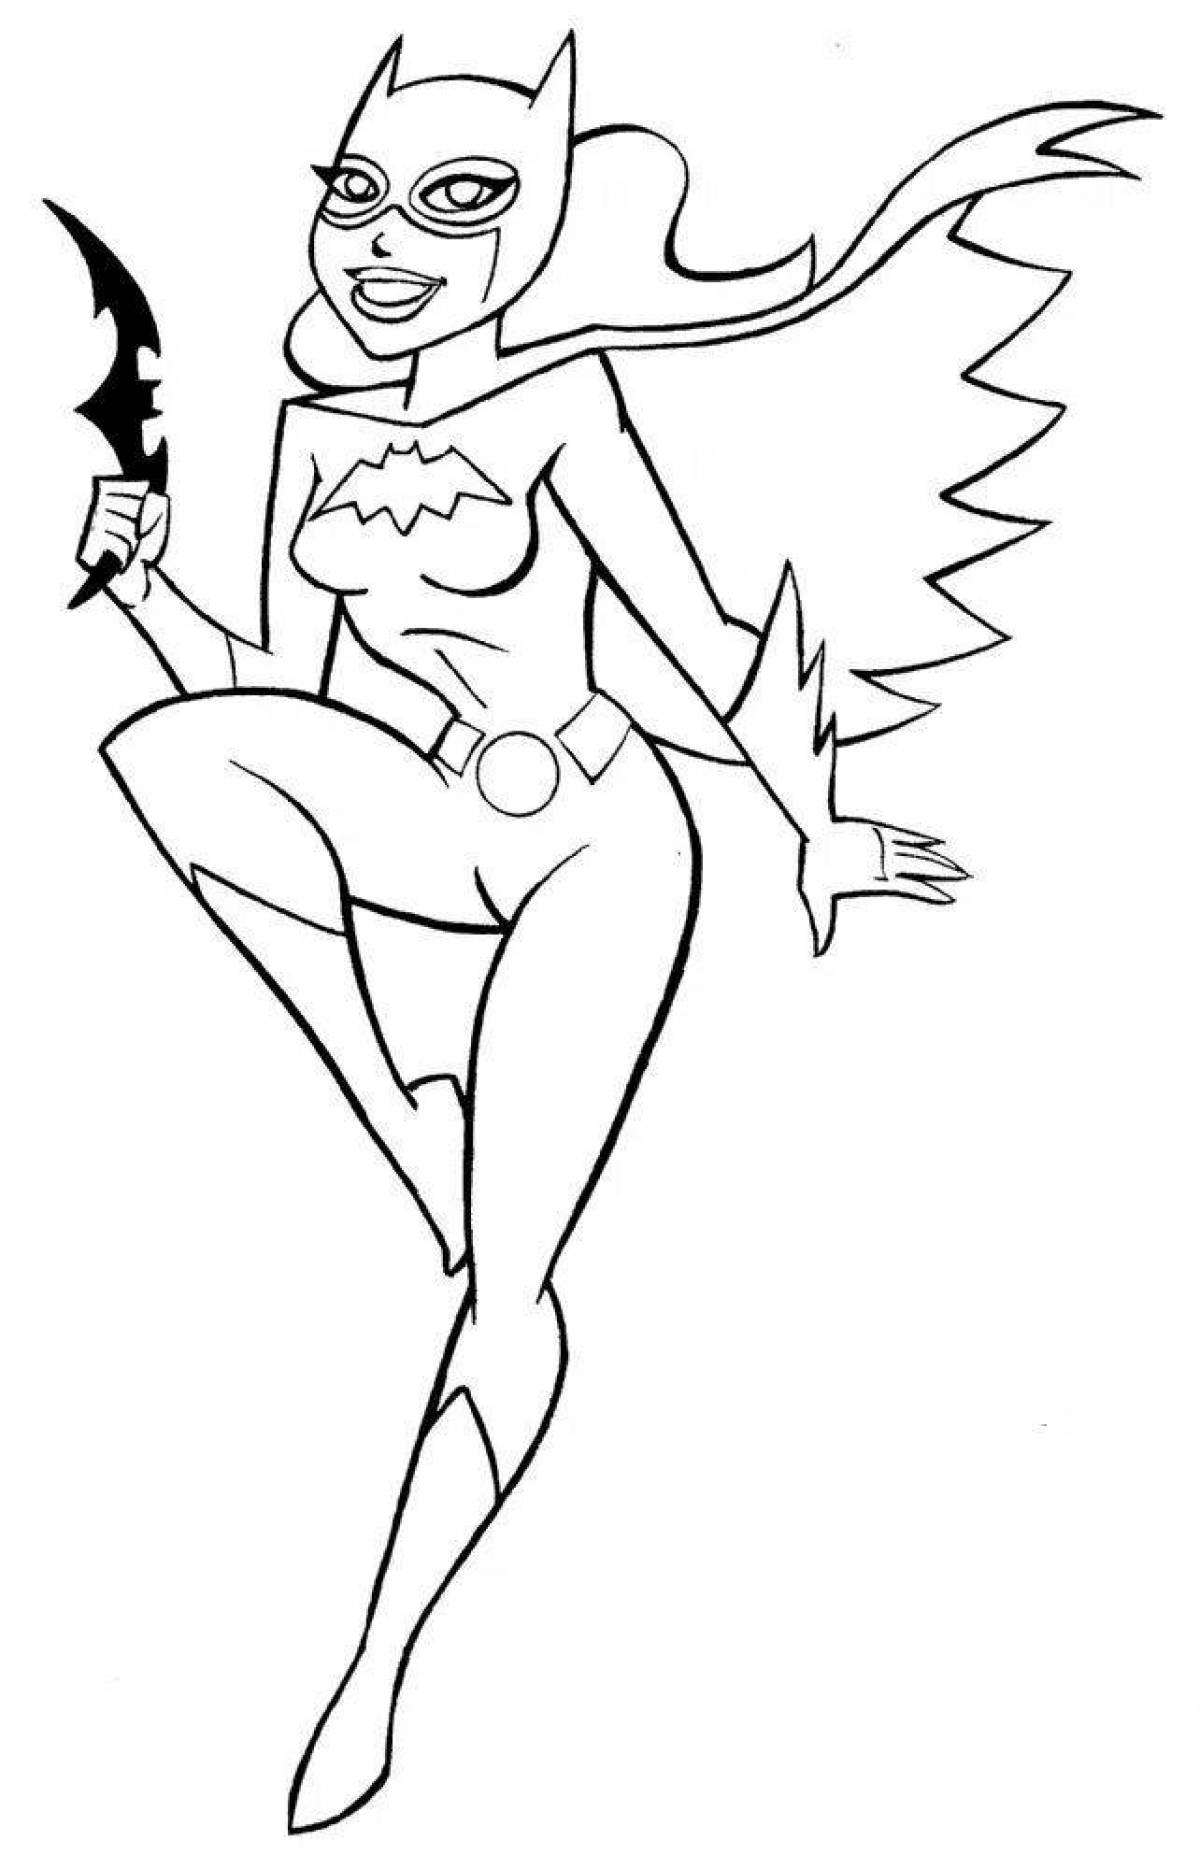 Coloring page friendly catwoman